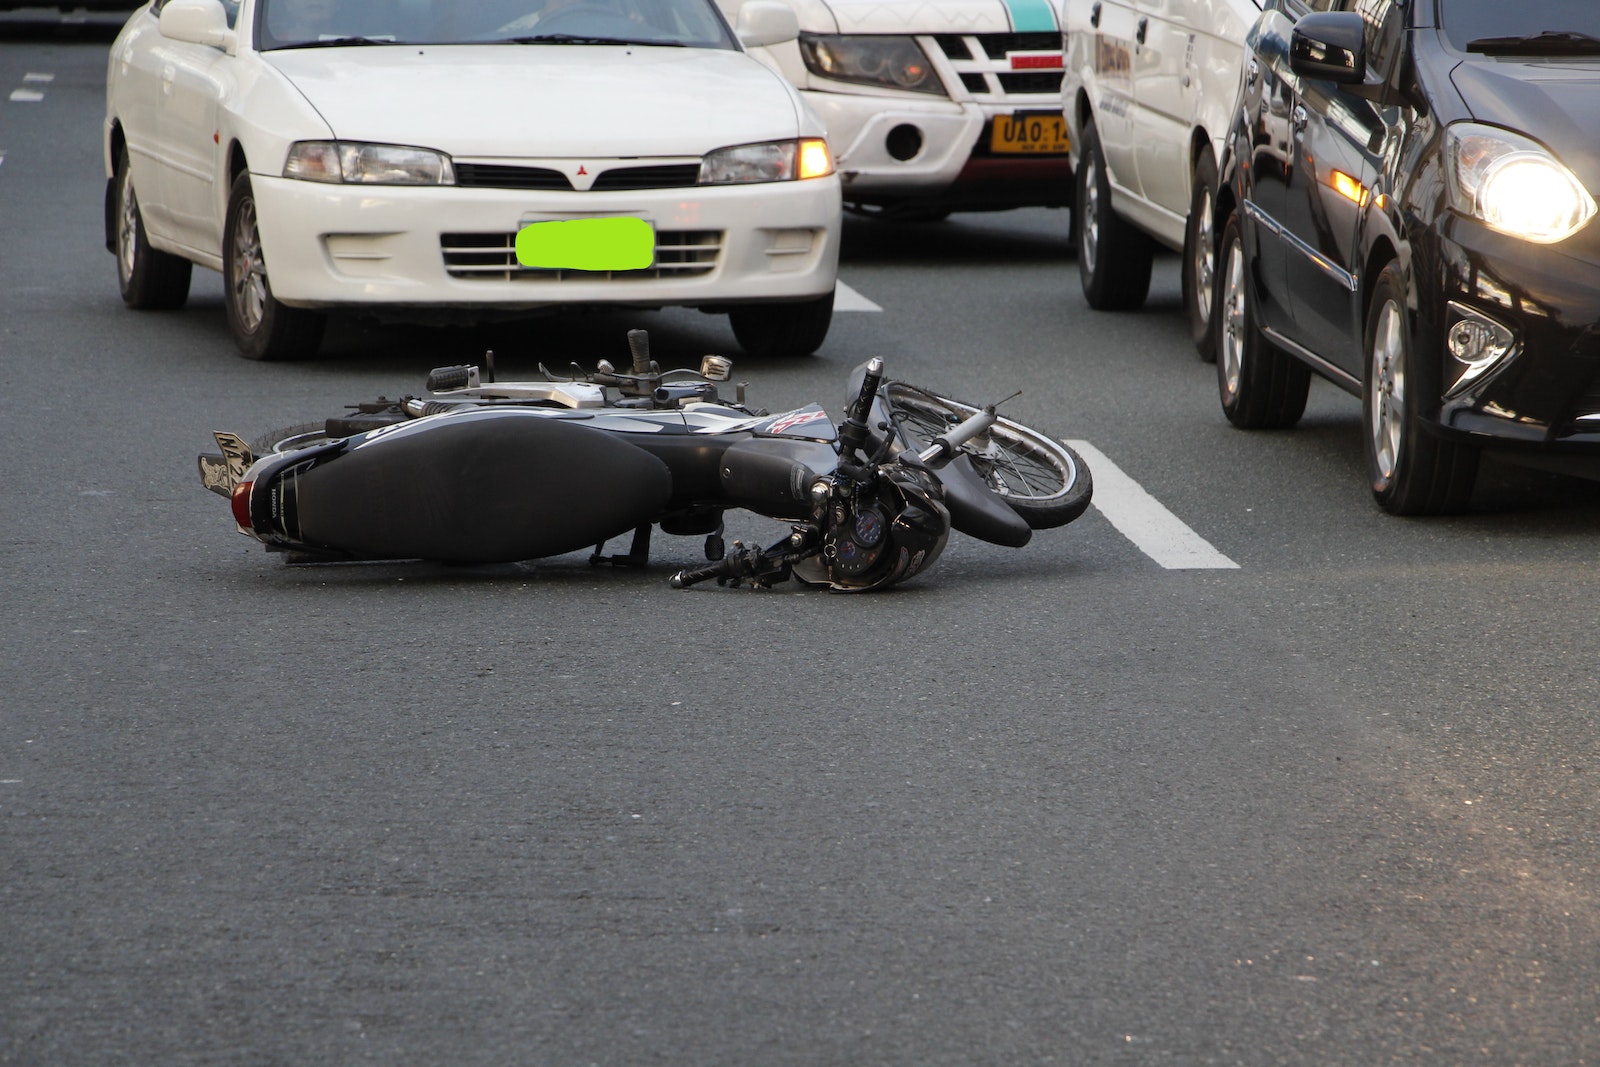 Motorcycle Lying on the Road